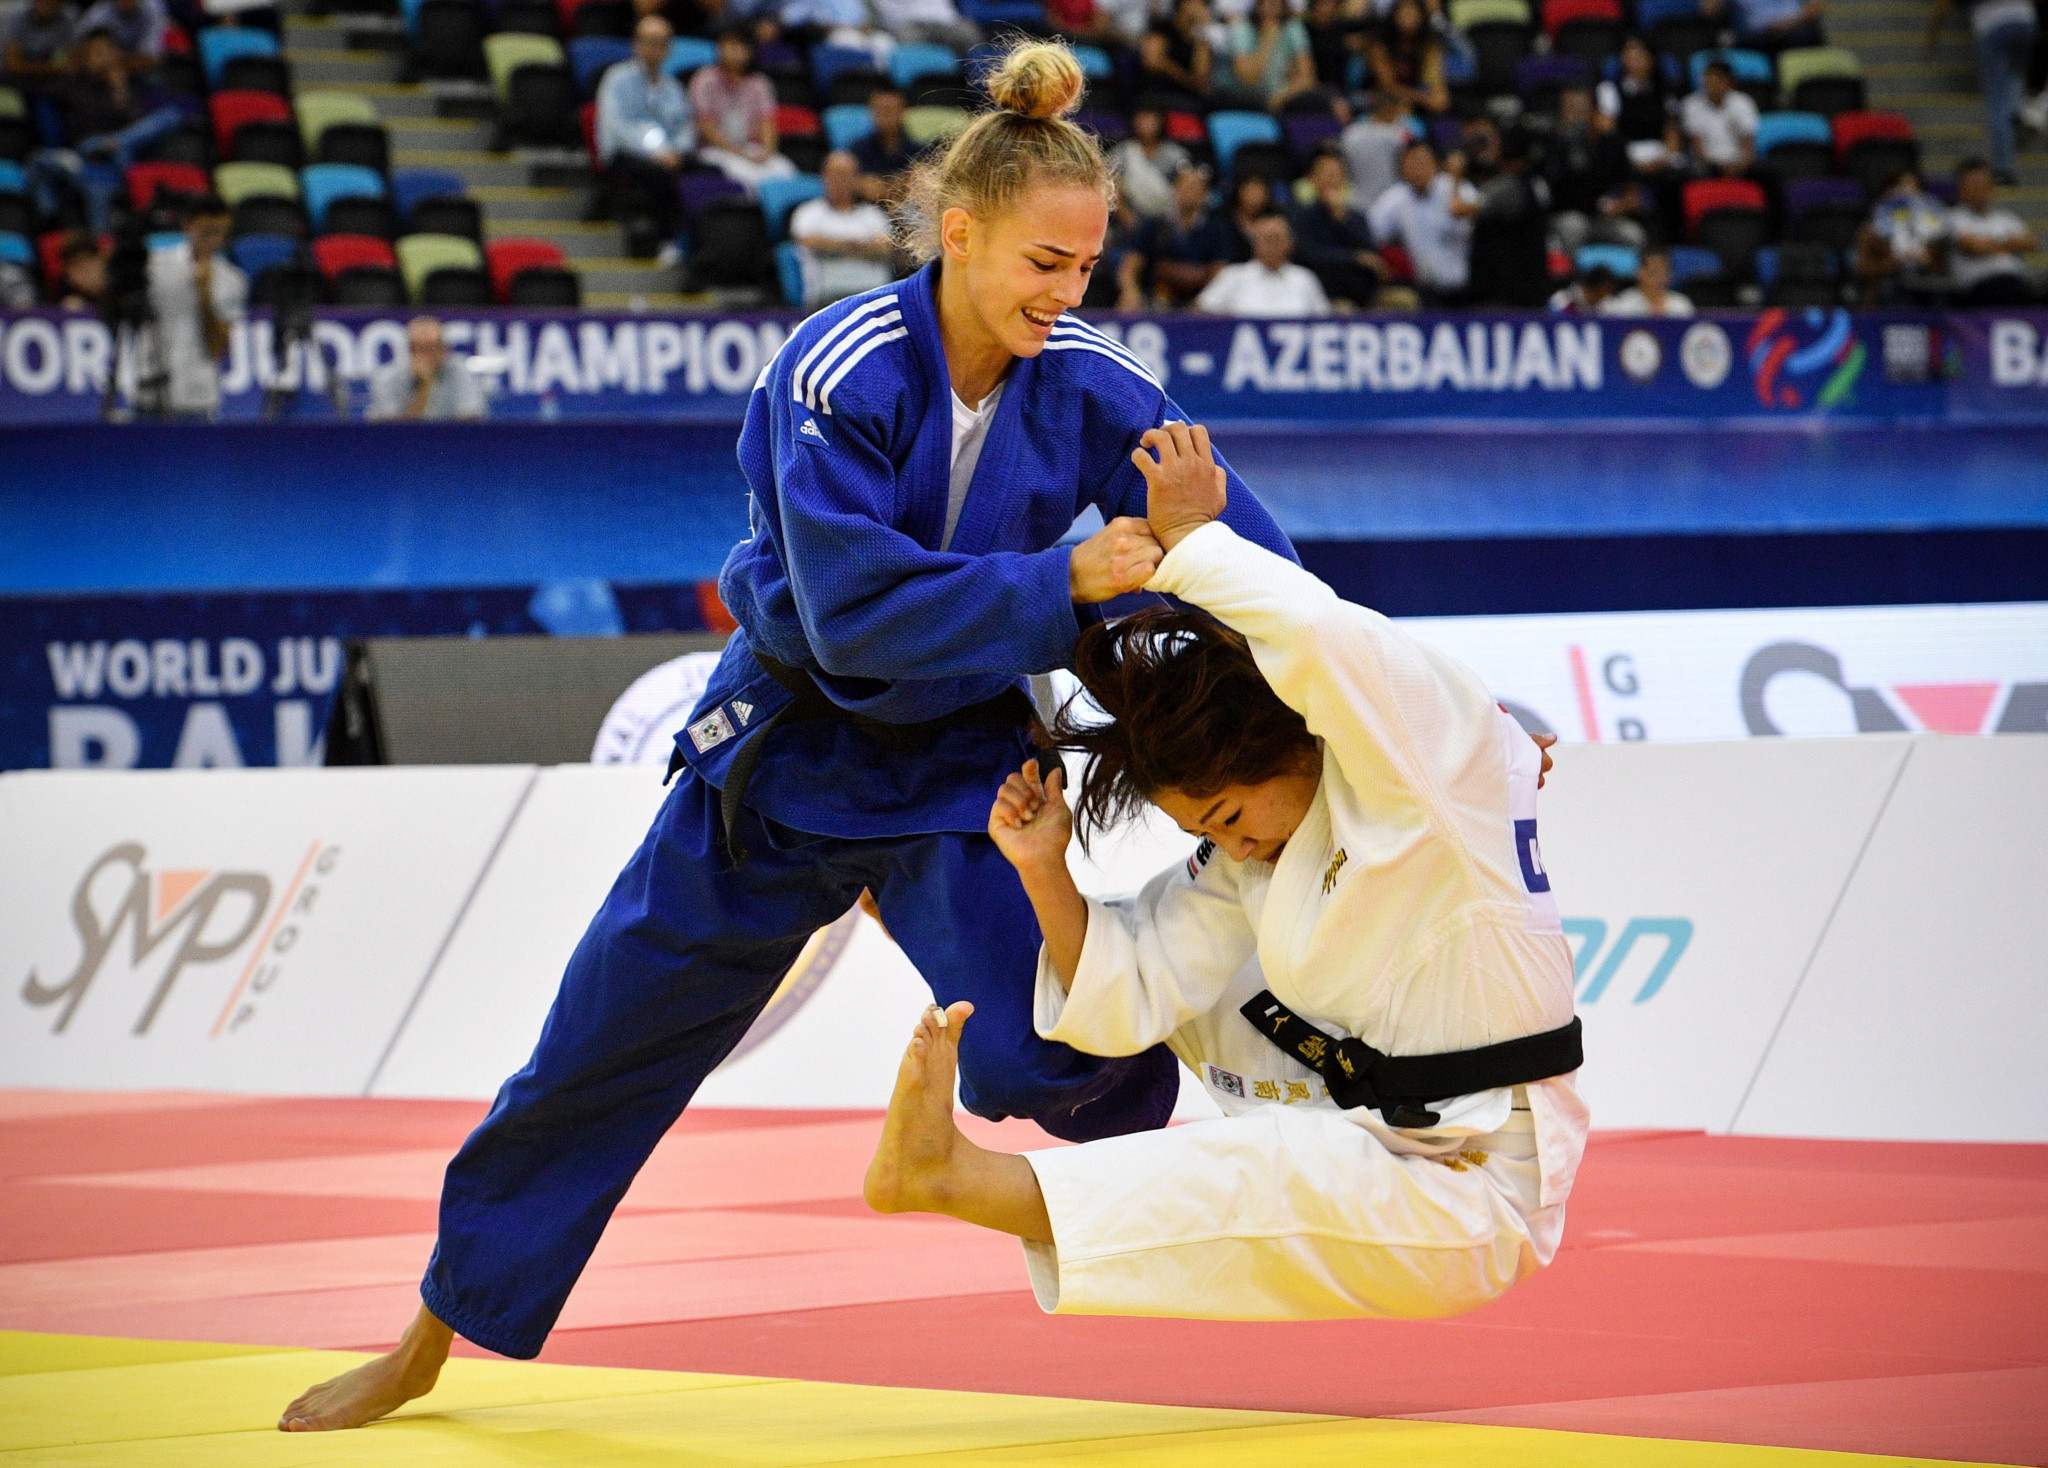 Ukrainian star Daria Bilodid will return to action for the first time since becoming junior world champion in October when she competes at the sixth edition of the IJF Grand Prix in Tbilisi this weekend ©Getty Images